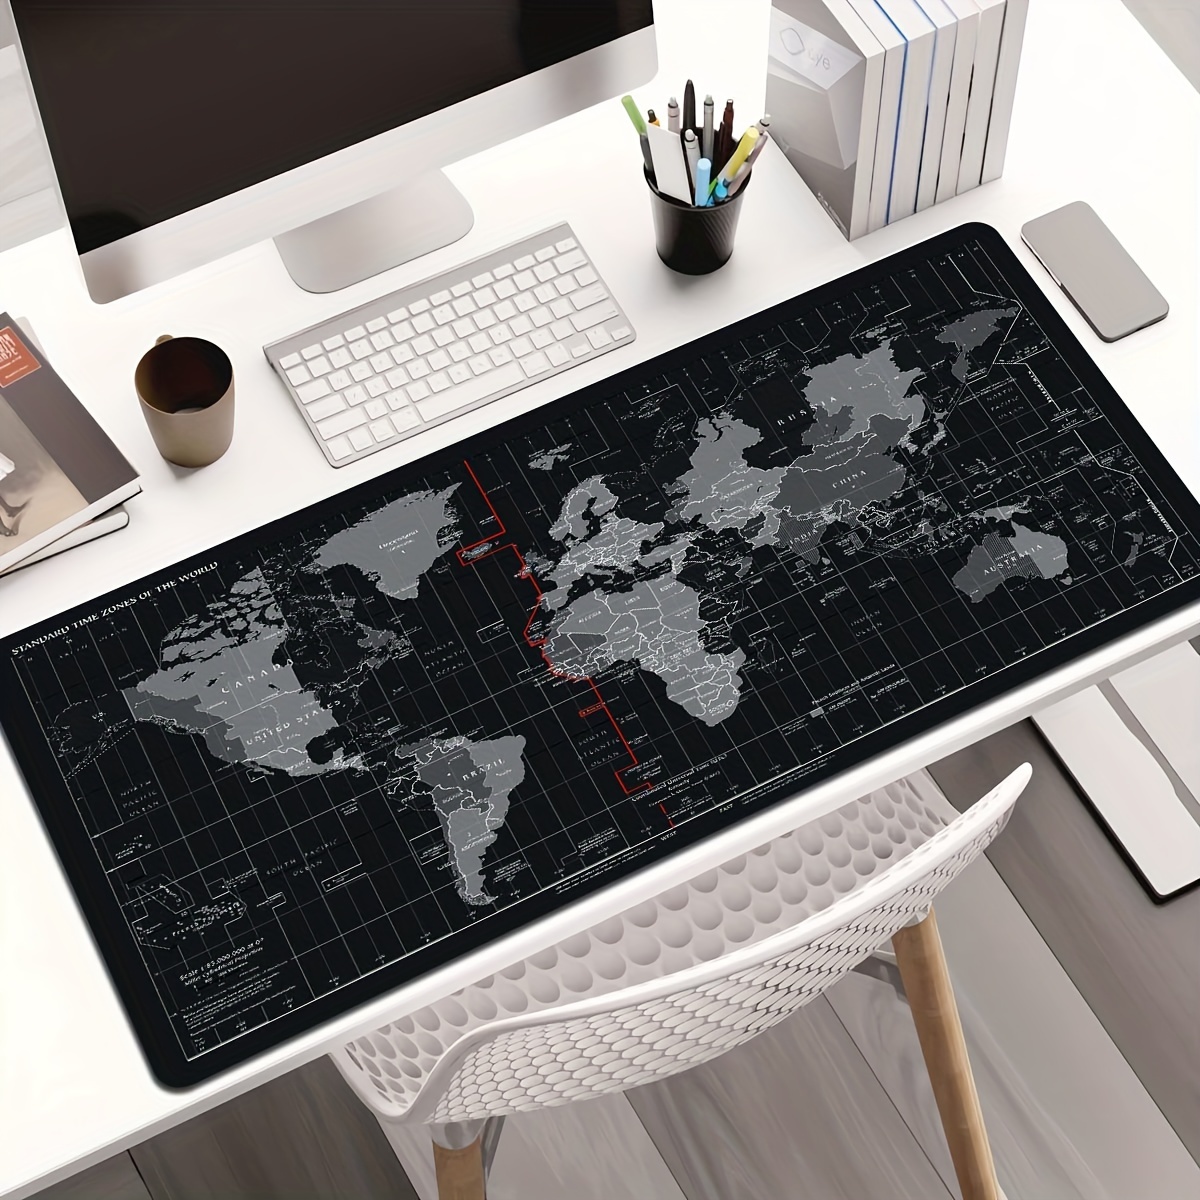 

World Time Zone Map Large Mouse Pad - Non-slip, Washable Polyester Desk Protector With Improved Precision For Gaming & Office Use - Durable Keyboard Mat, Desktop Accessory, Ideal Gift